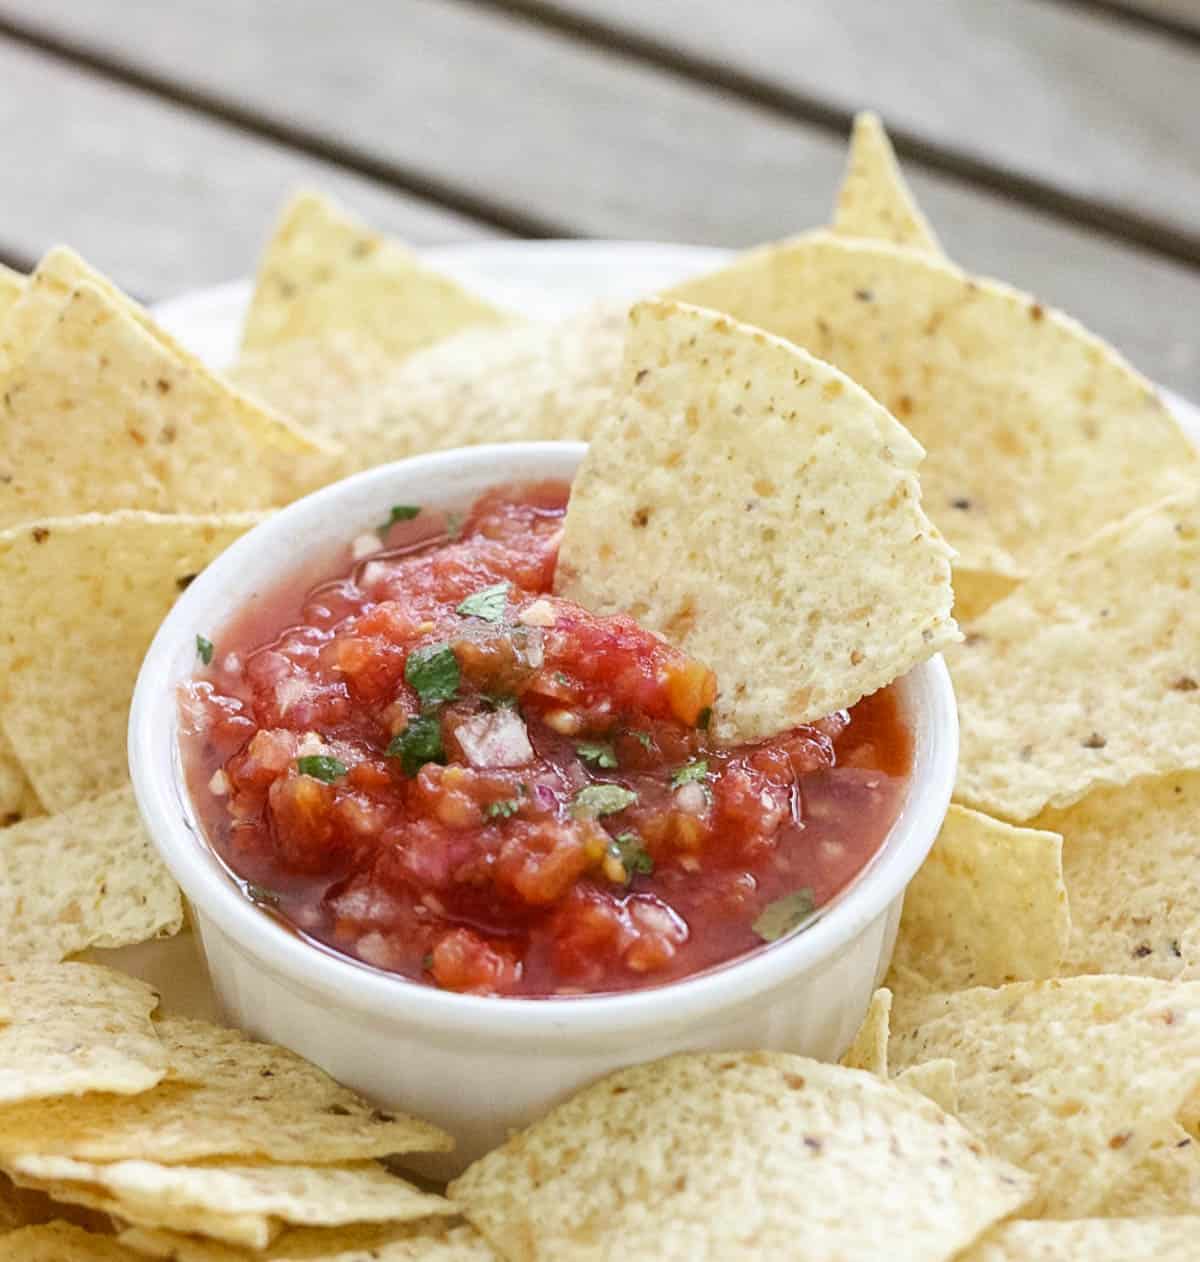 plate of chips with bowl of salsa and a chip sitting in salsa with canned tomatoes.